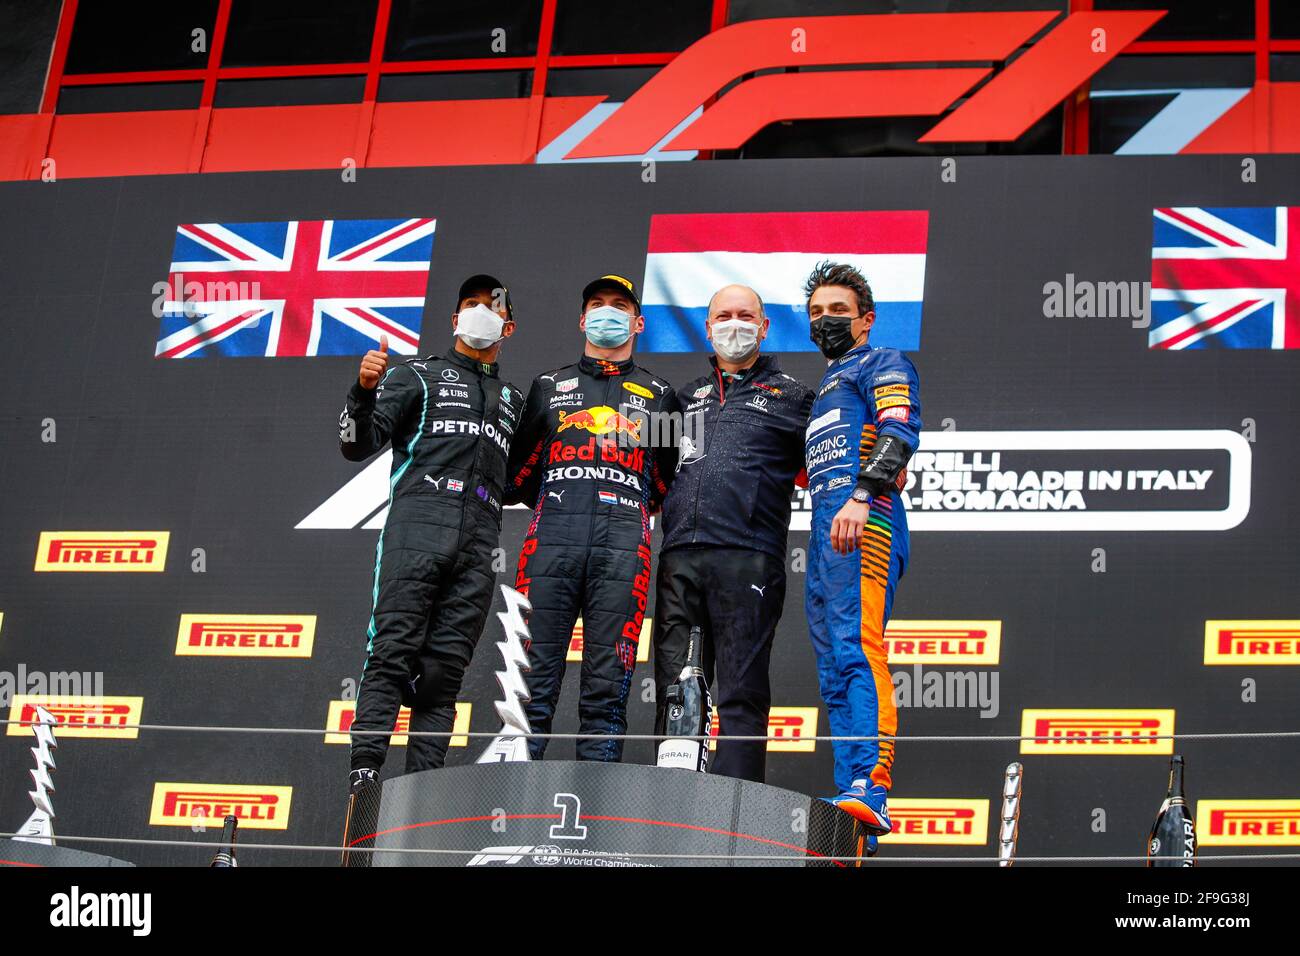 Imola, Italy. 18th Apr, 2021. The podium (L to R): Lewis Hamilton (GBR) Mercedes AMG F1, second; Max Verstappen (NLD) Red Bull Racing, race winner; Karl Sengstbratl, Red Bull Racing Finance & Operations Director; Lando Norris (GBR) McLaren, third. Emilia Romagna Grand Prix, Sunday 18th April 2021. Imola, Italy. FIA Pool Image for Editorial Use Only Credit: James Moy/Alamy Live News Stock Photo